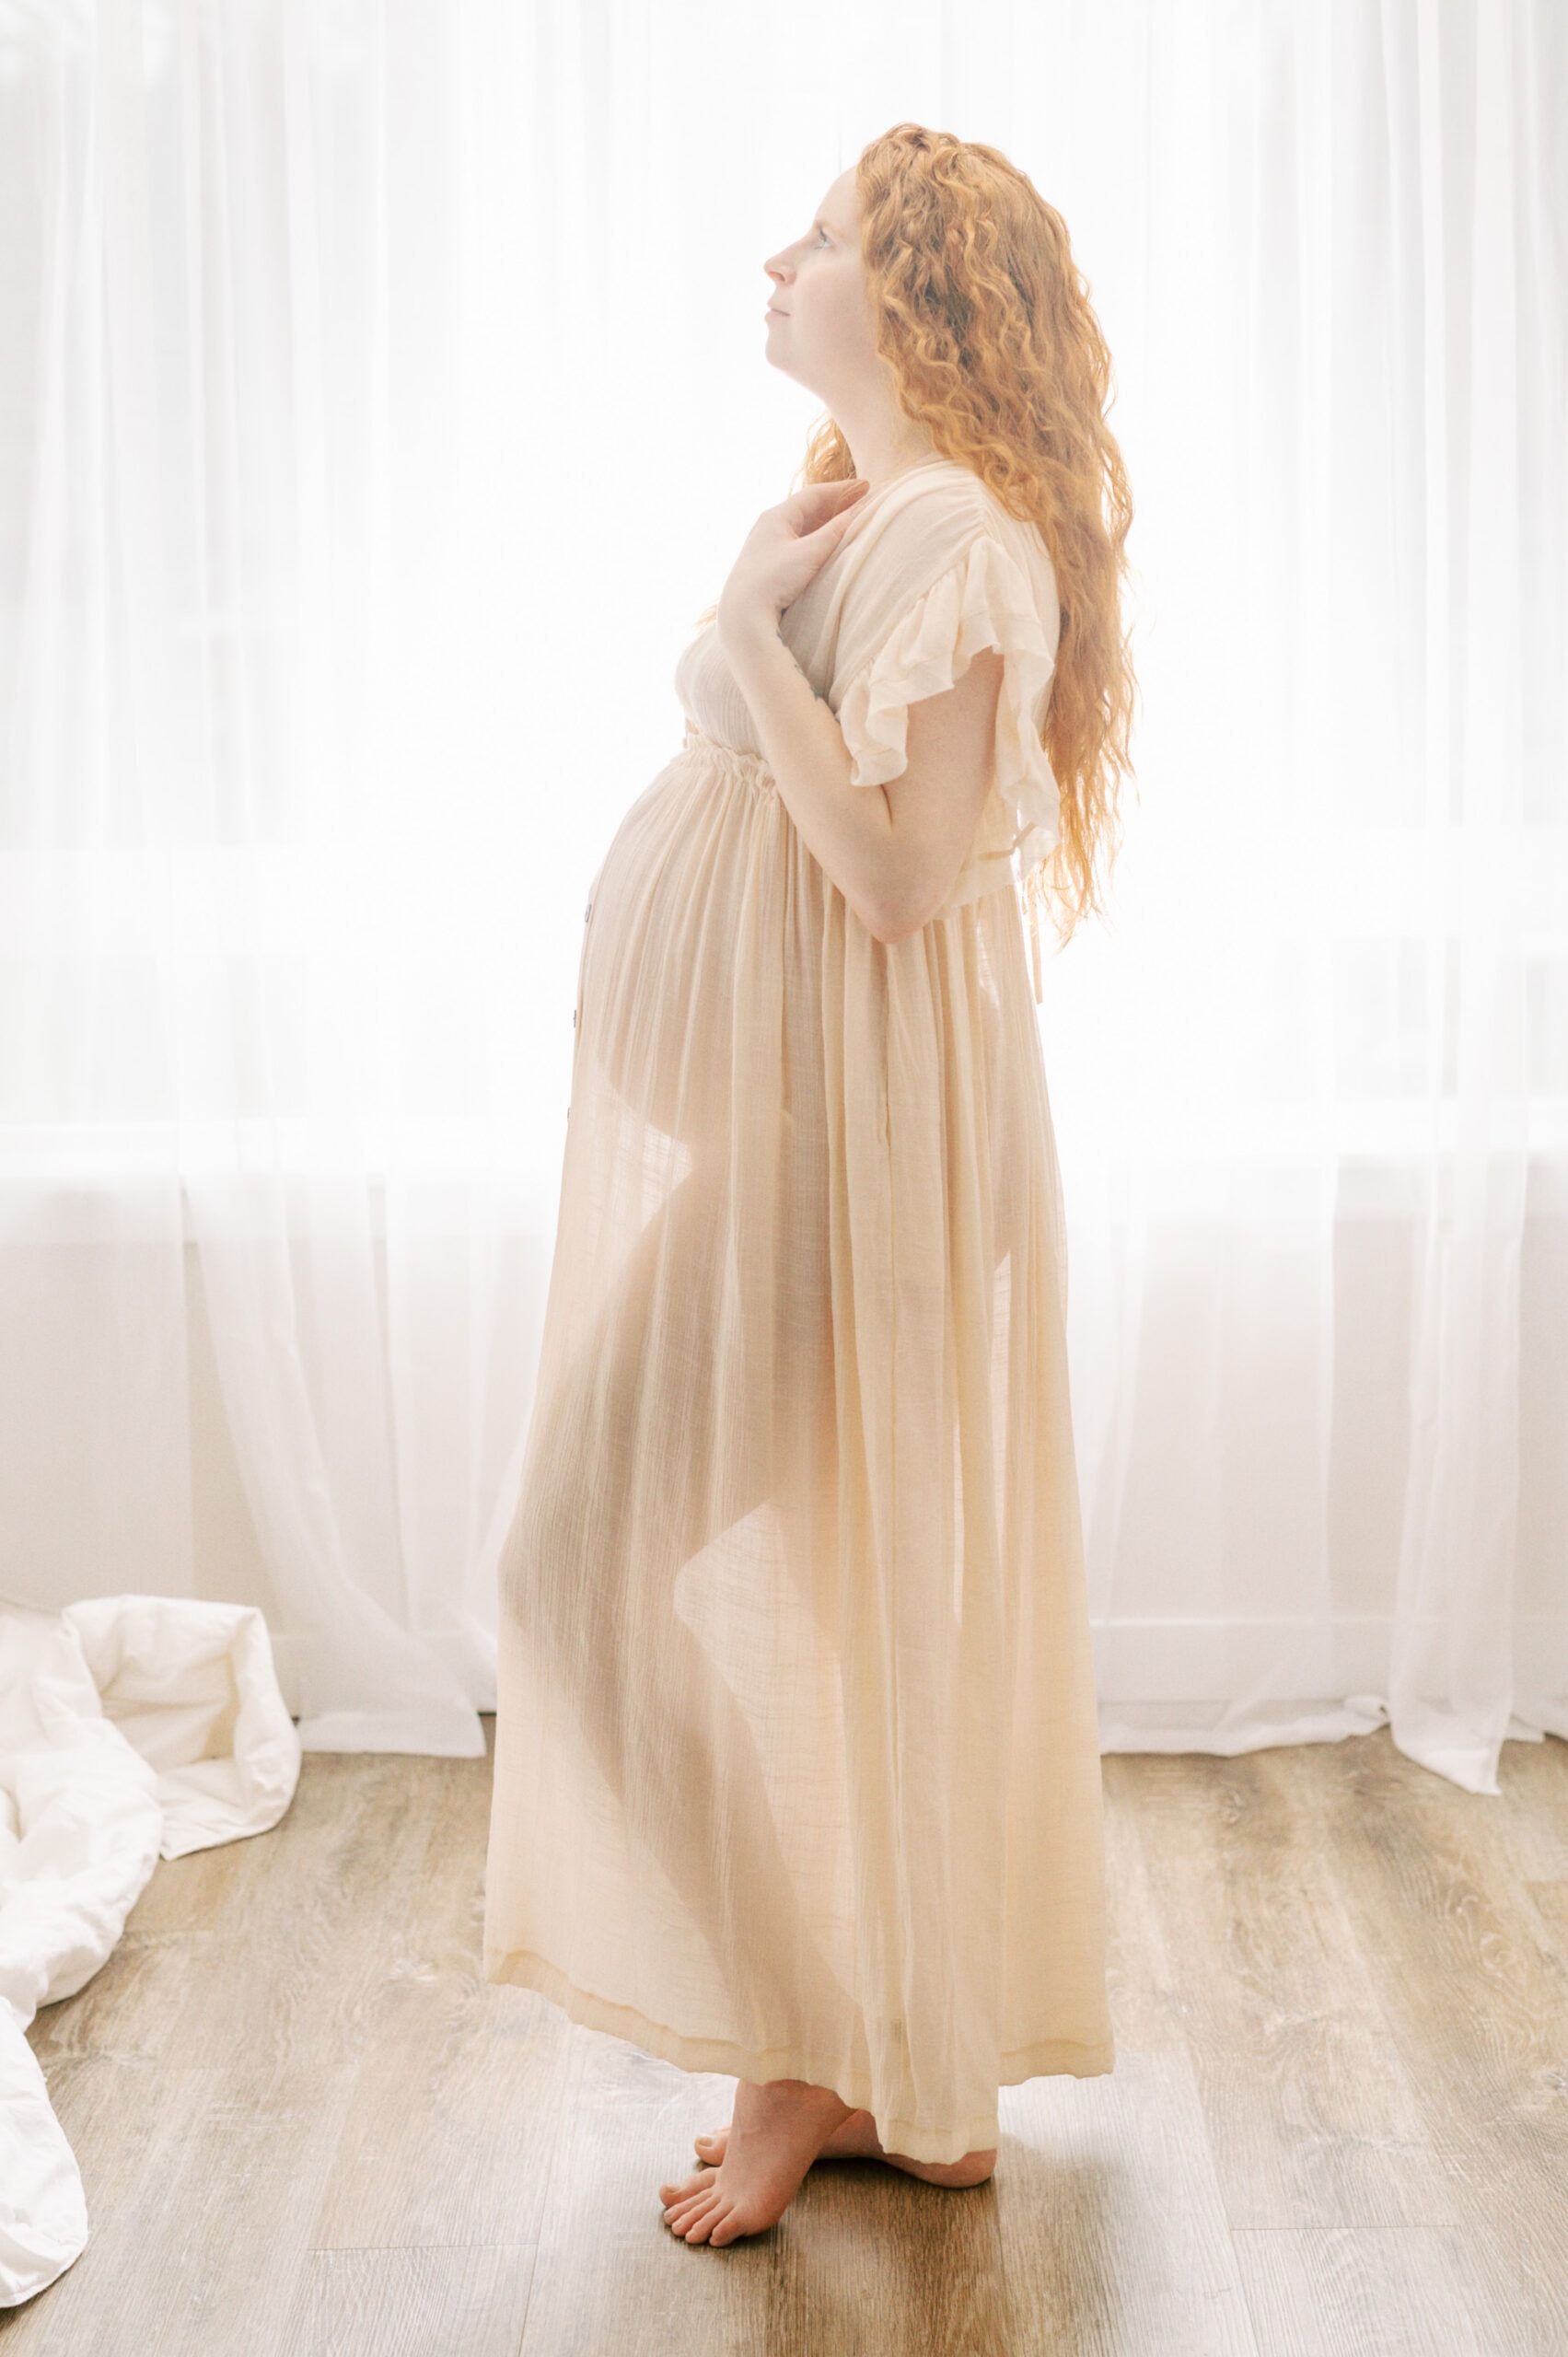 A mother to be stands in a studio window in a sheet cream dress